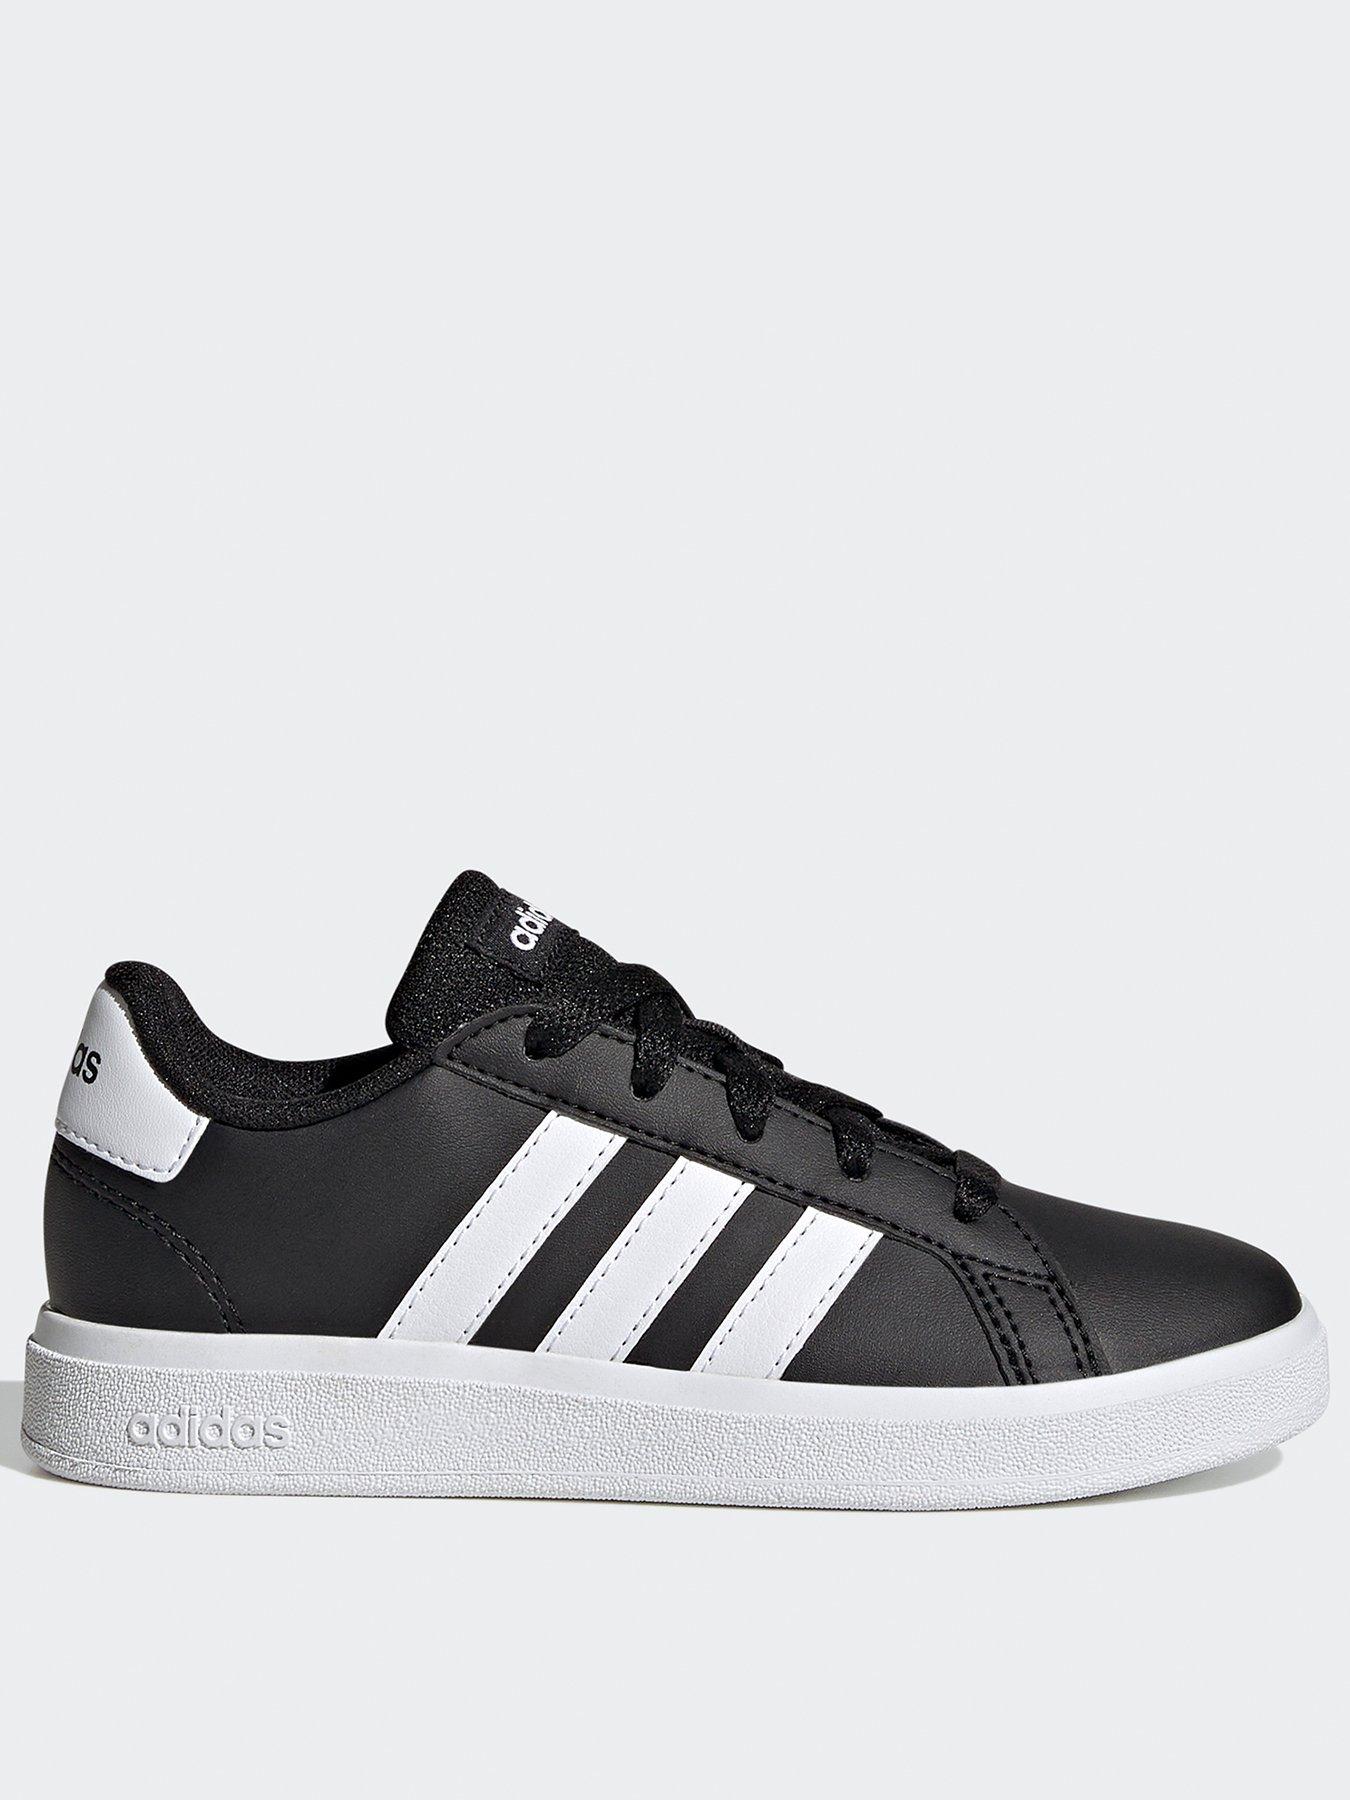 adidas Sportswear Unisex Kids Grand Court 2.0 Trainers - B, Black, Size 11 Younger